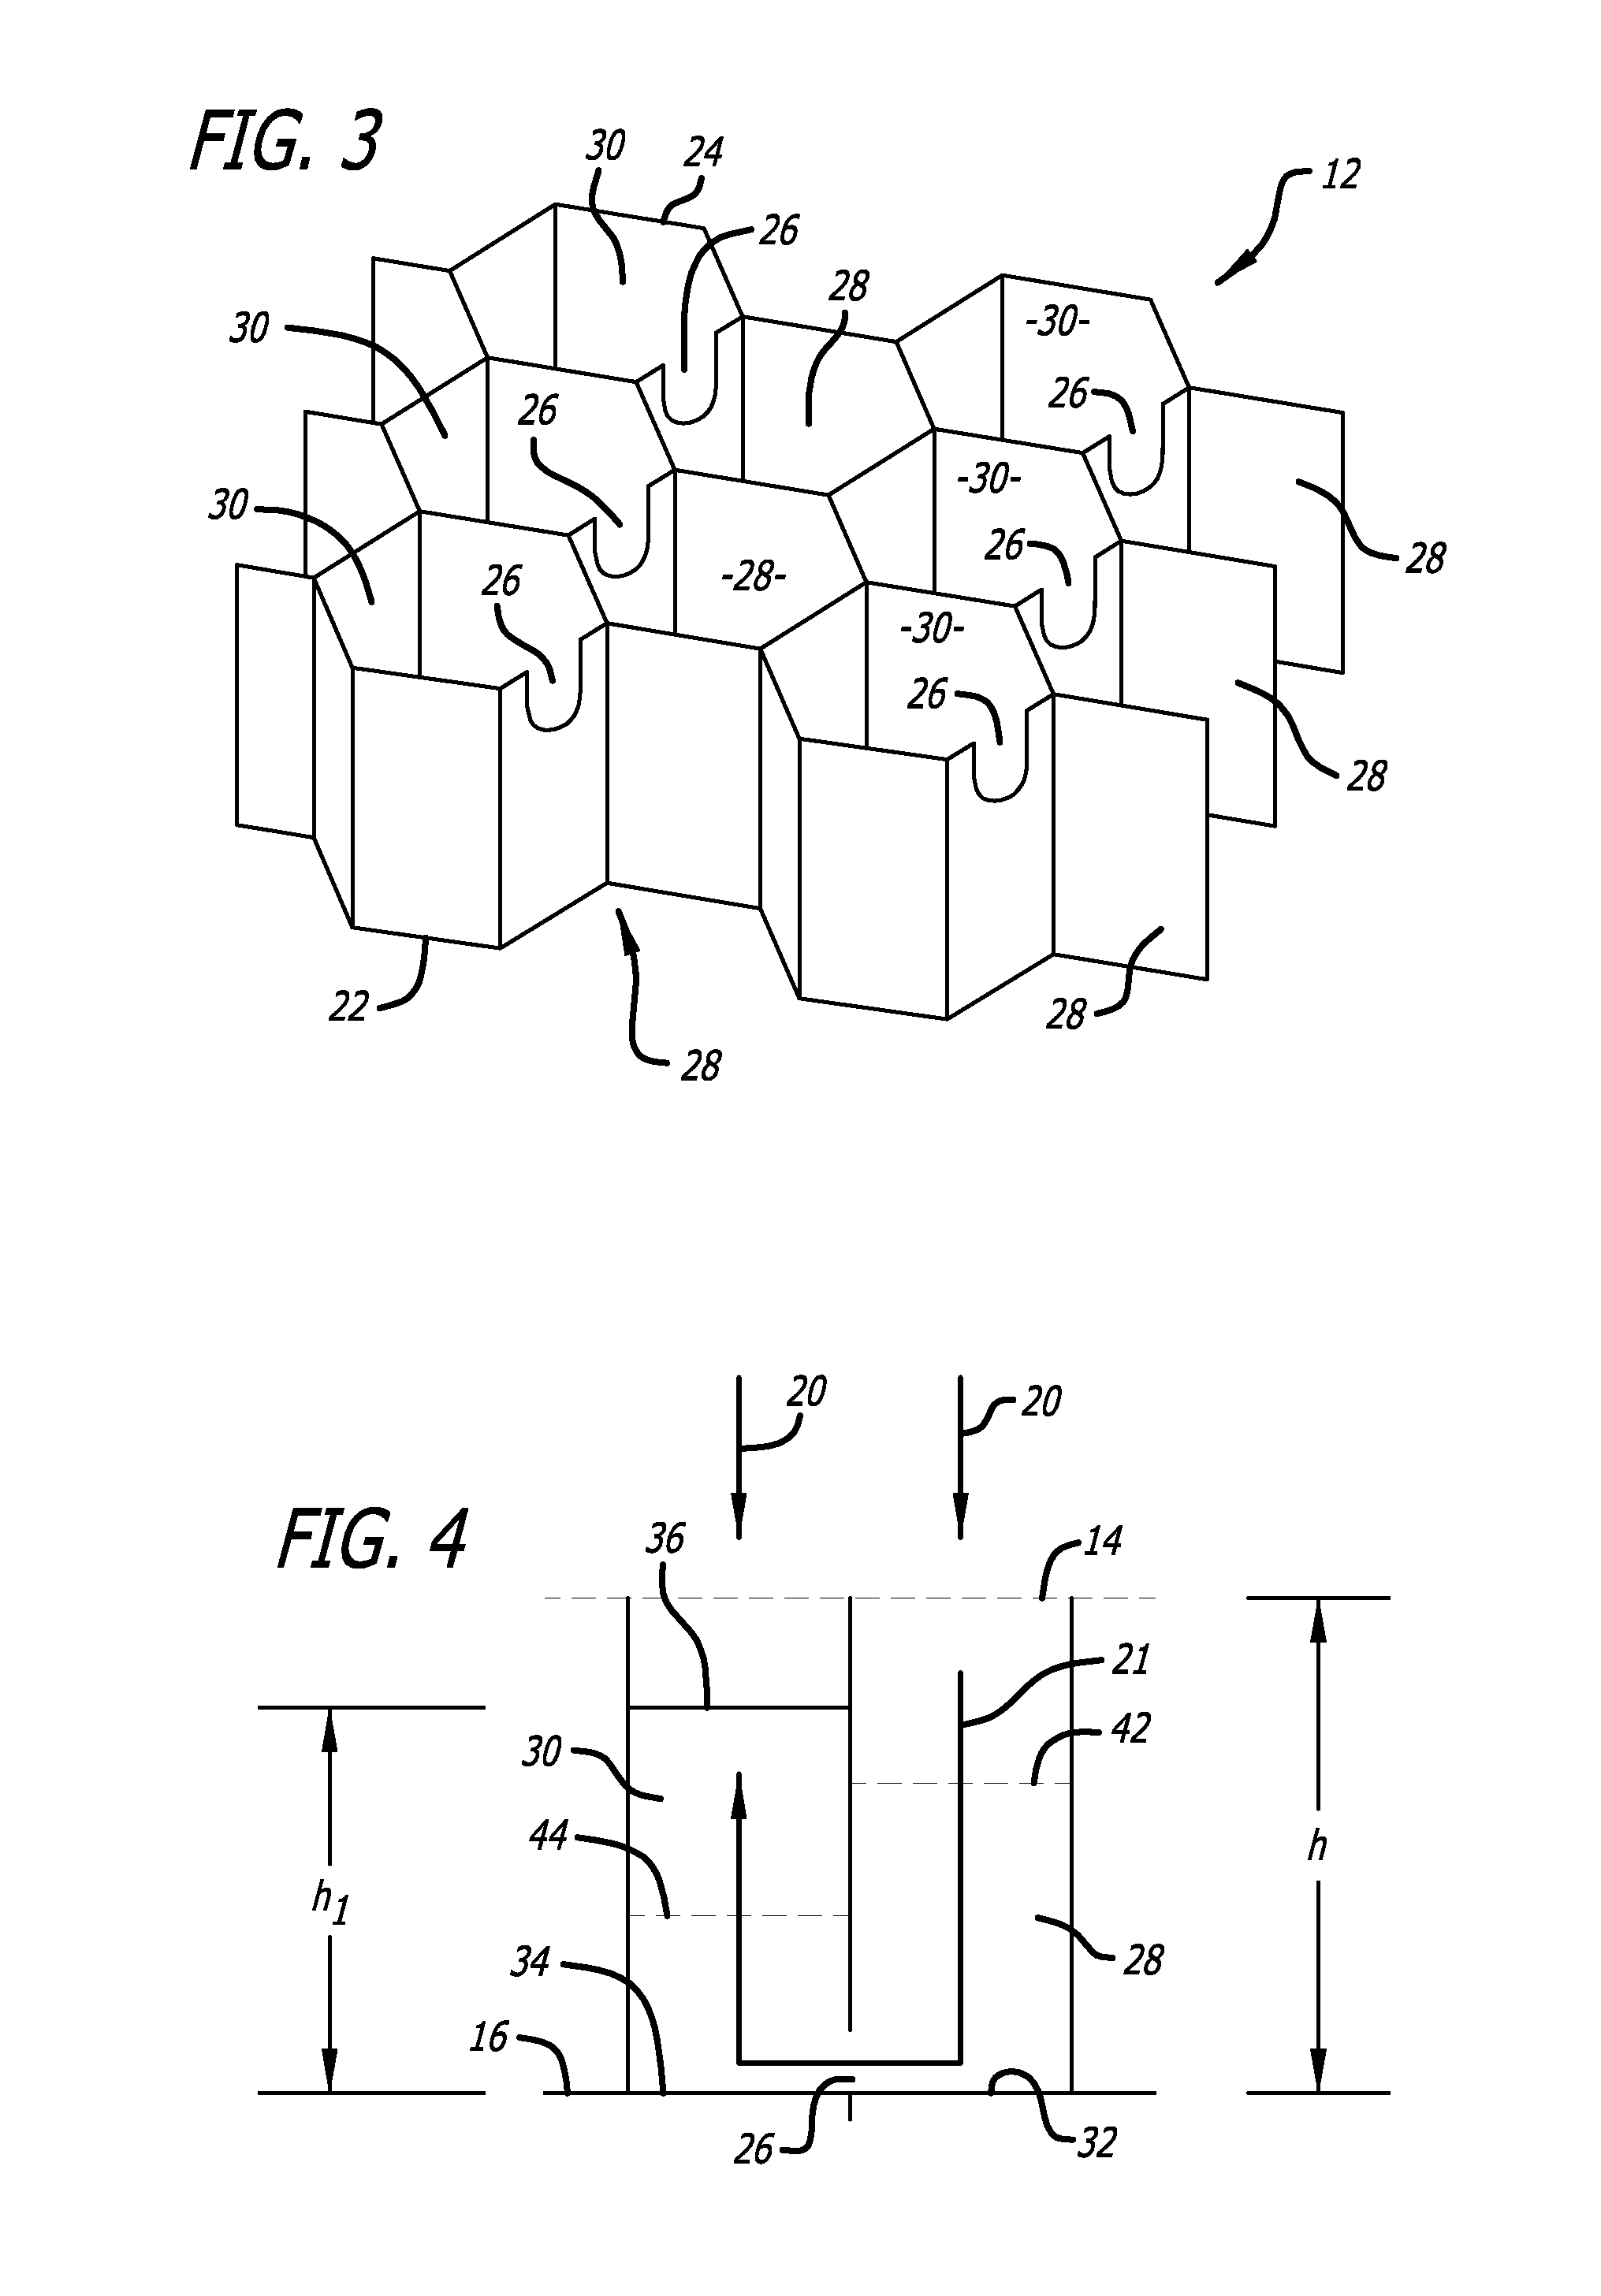 Acoustic structure with increased bandwidth suppression